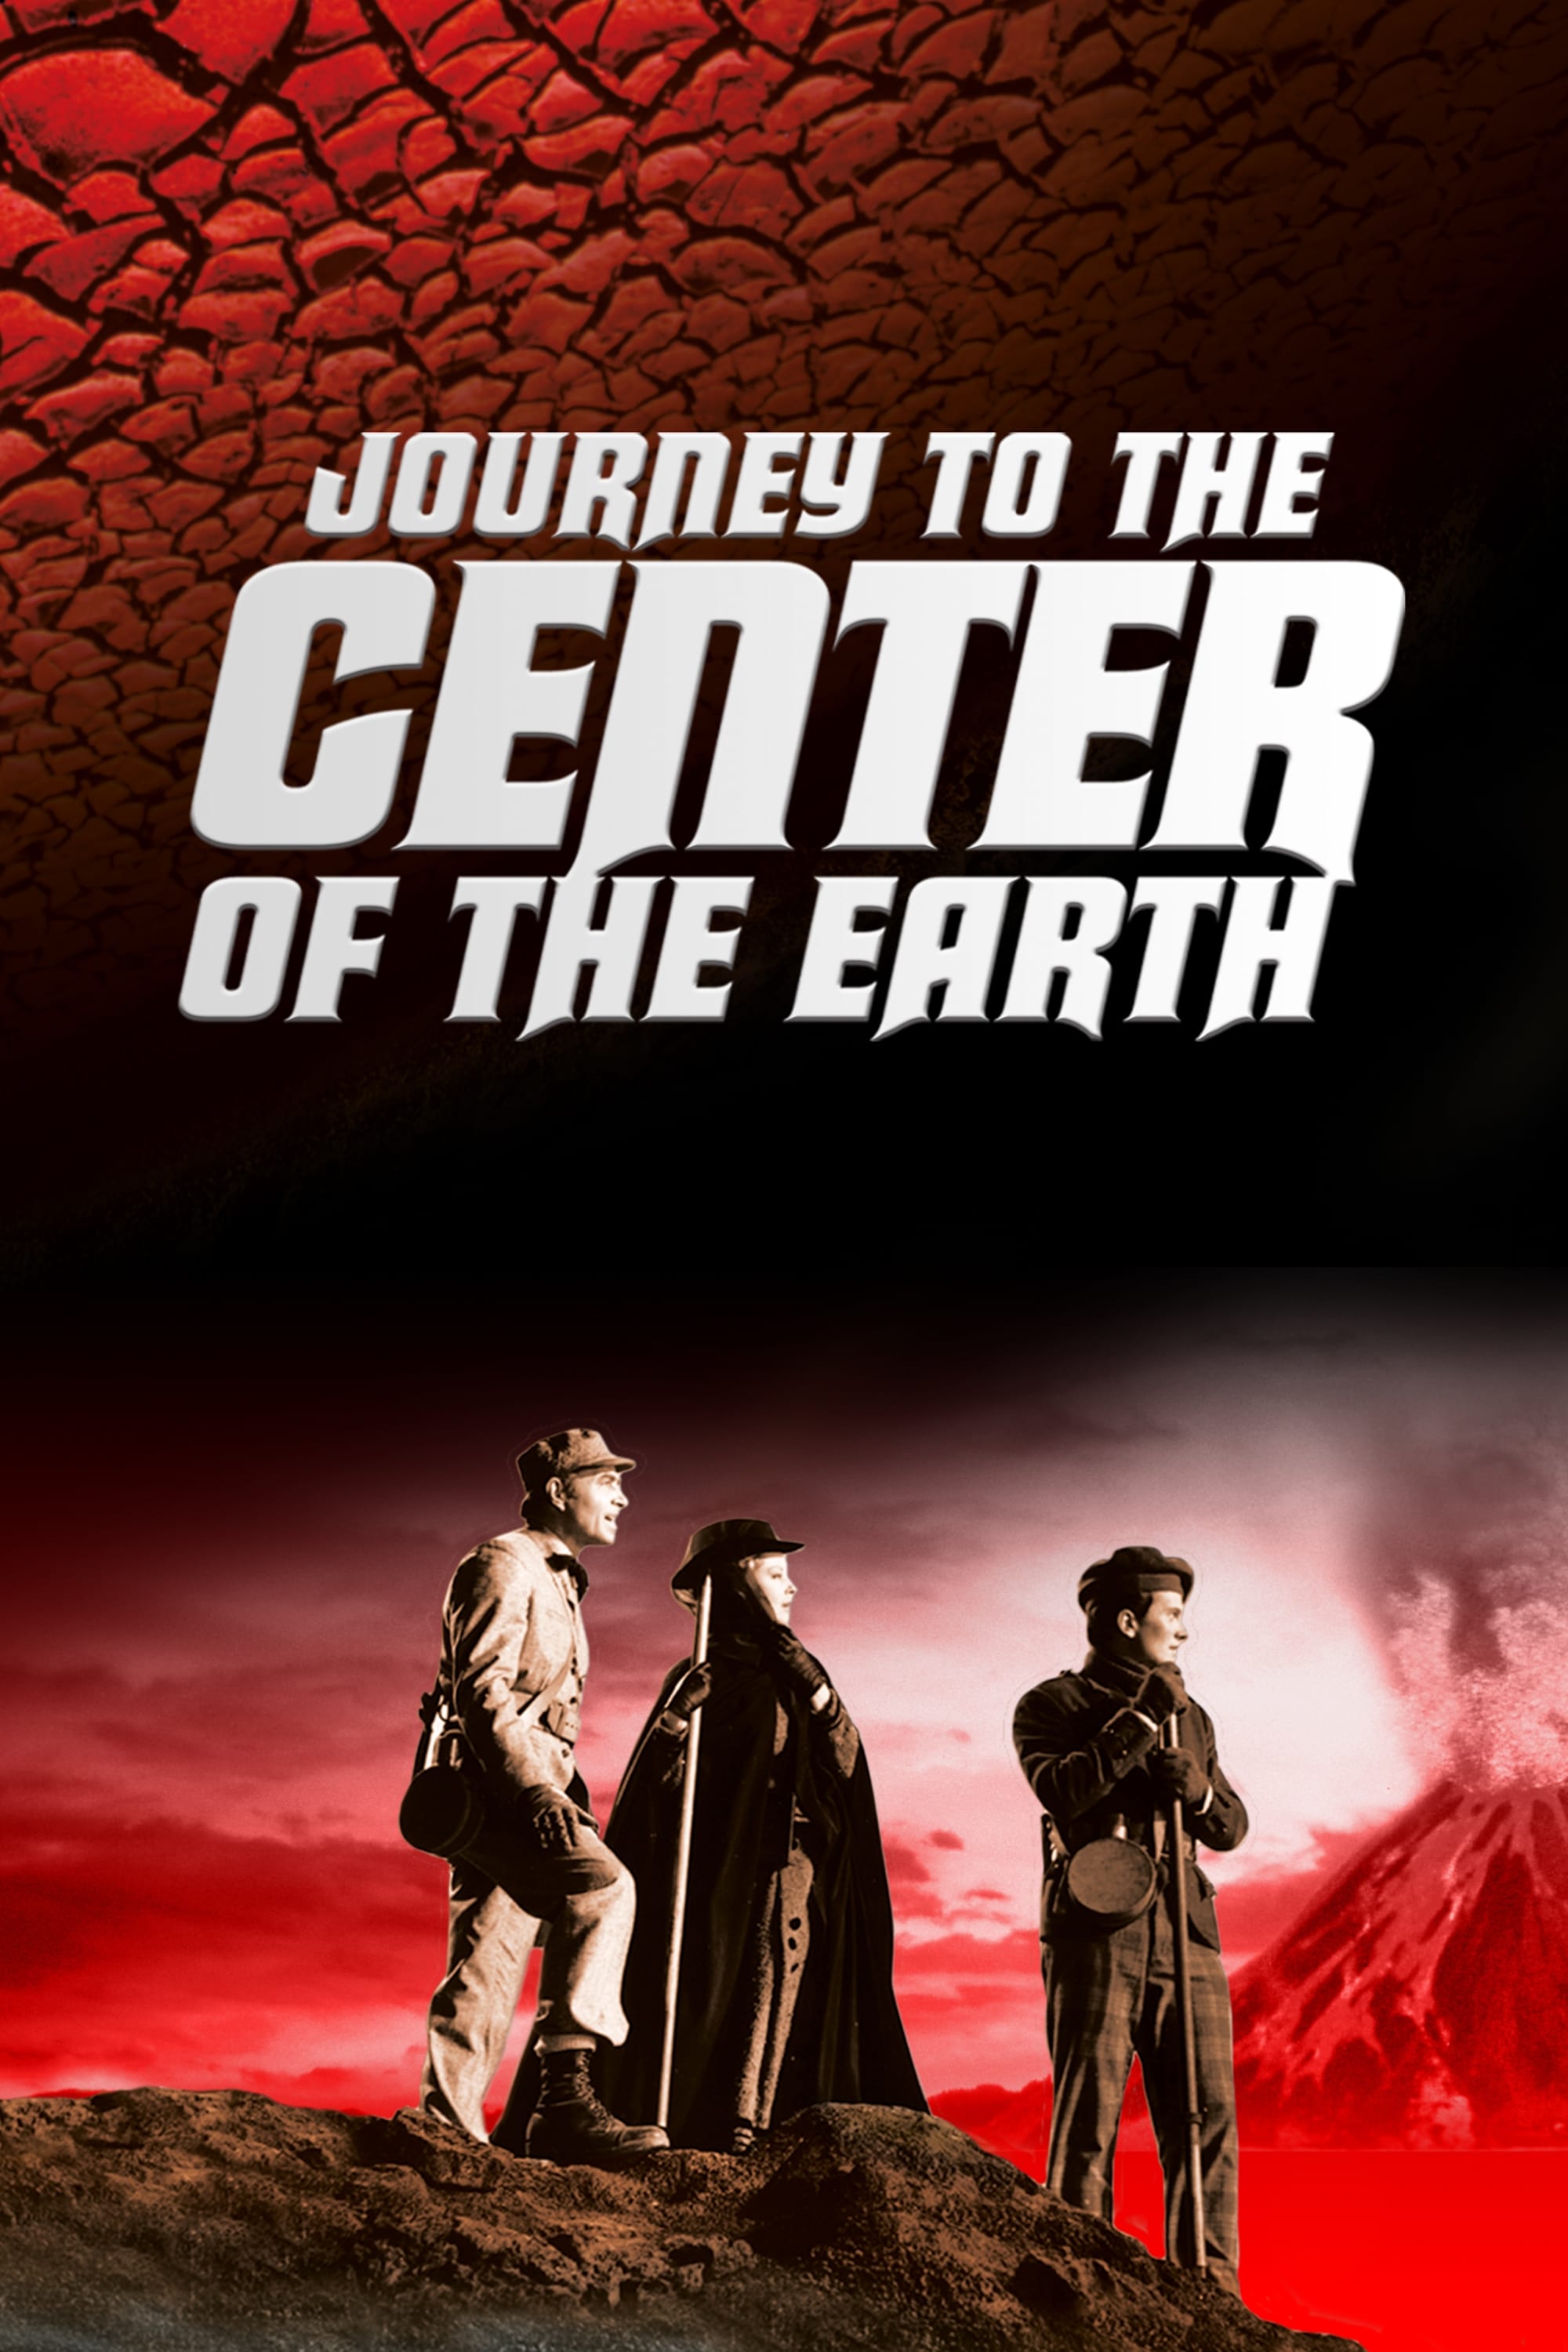 journey to the center of the earth lyrics